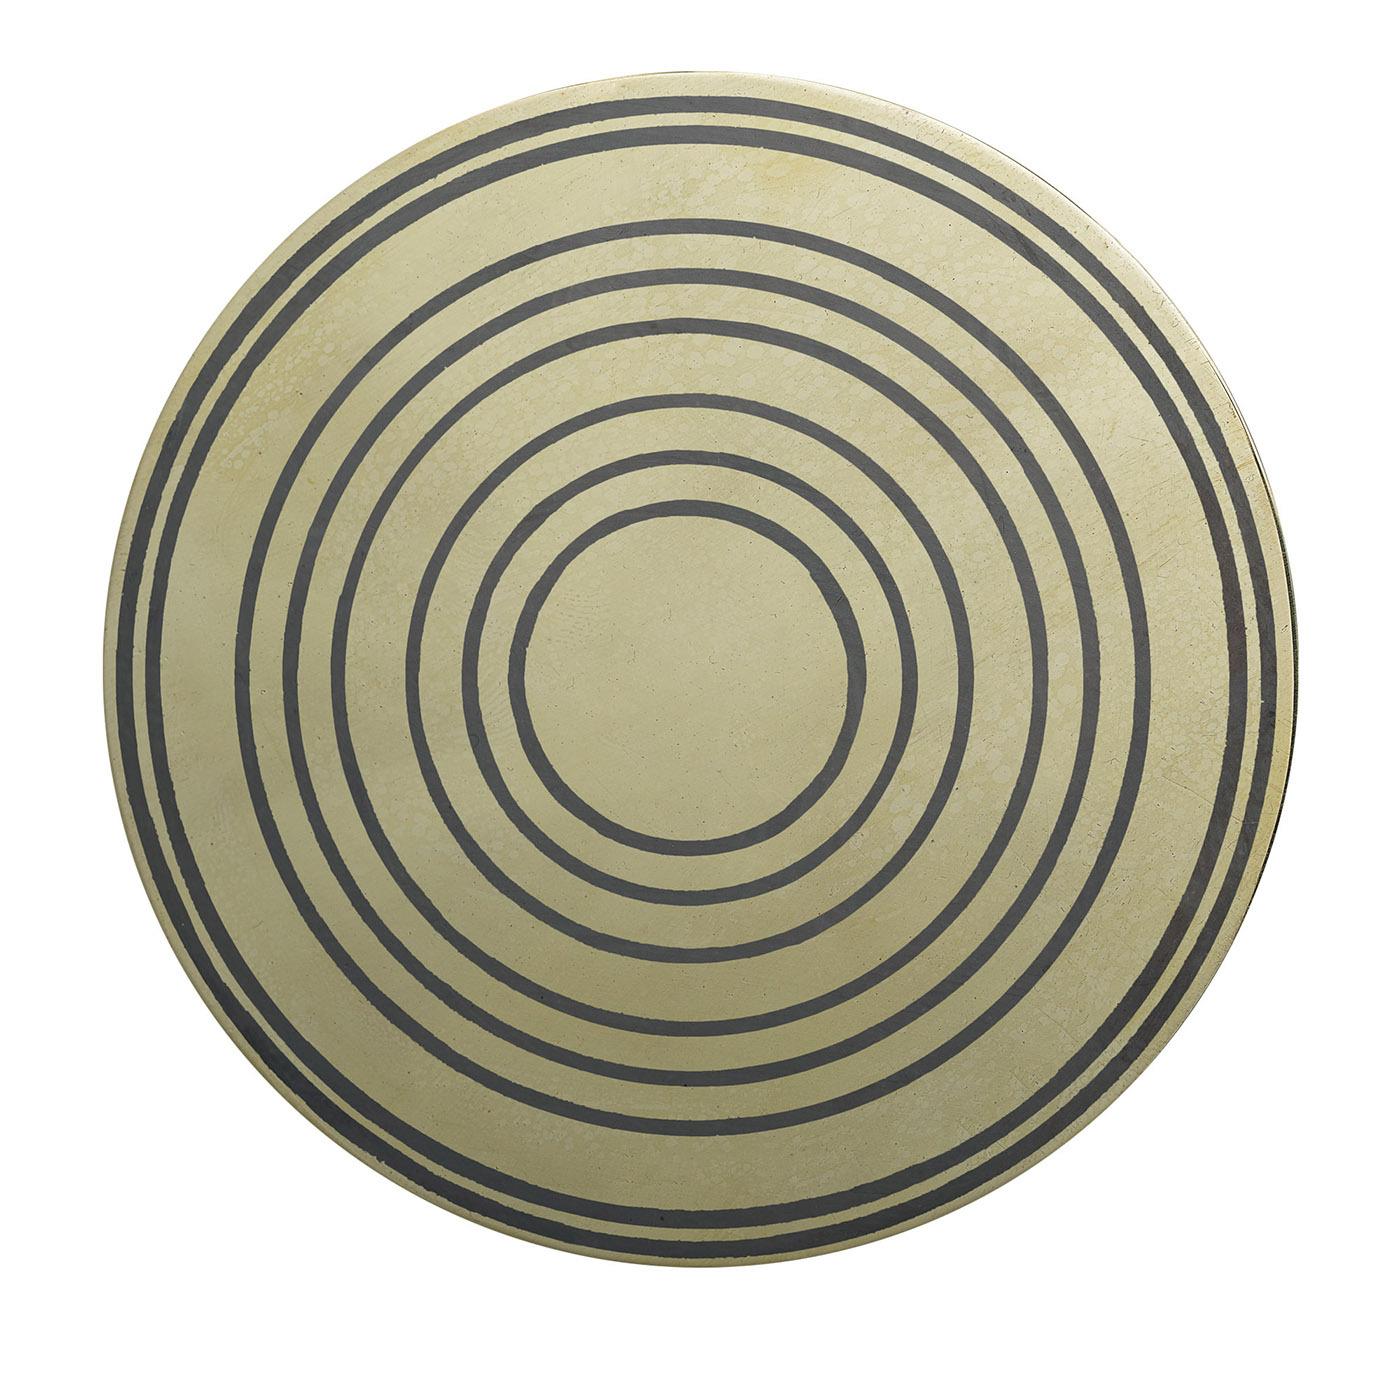 This set of six brass coasters belongs to the Aniconismo Collection of designs following the tenets of aniconism, banning the depiction of living creatures shared by many cultures. Echoing kinetic forces with their concentric design, they are